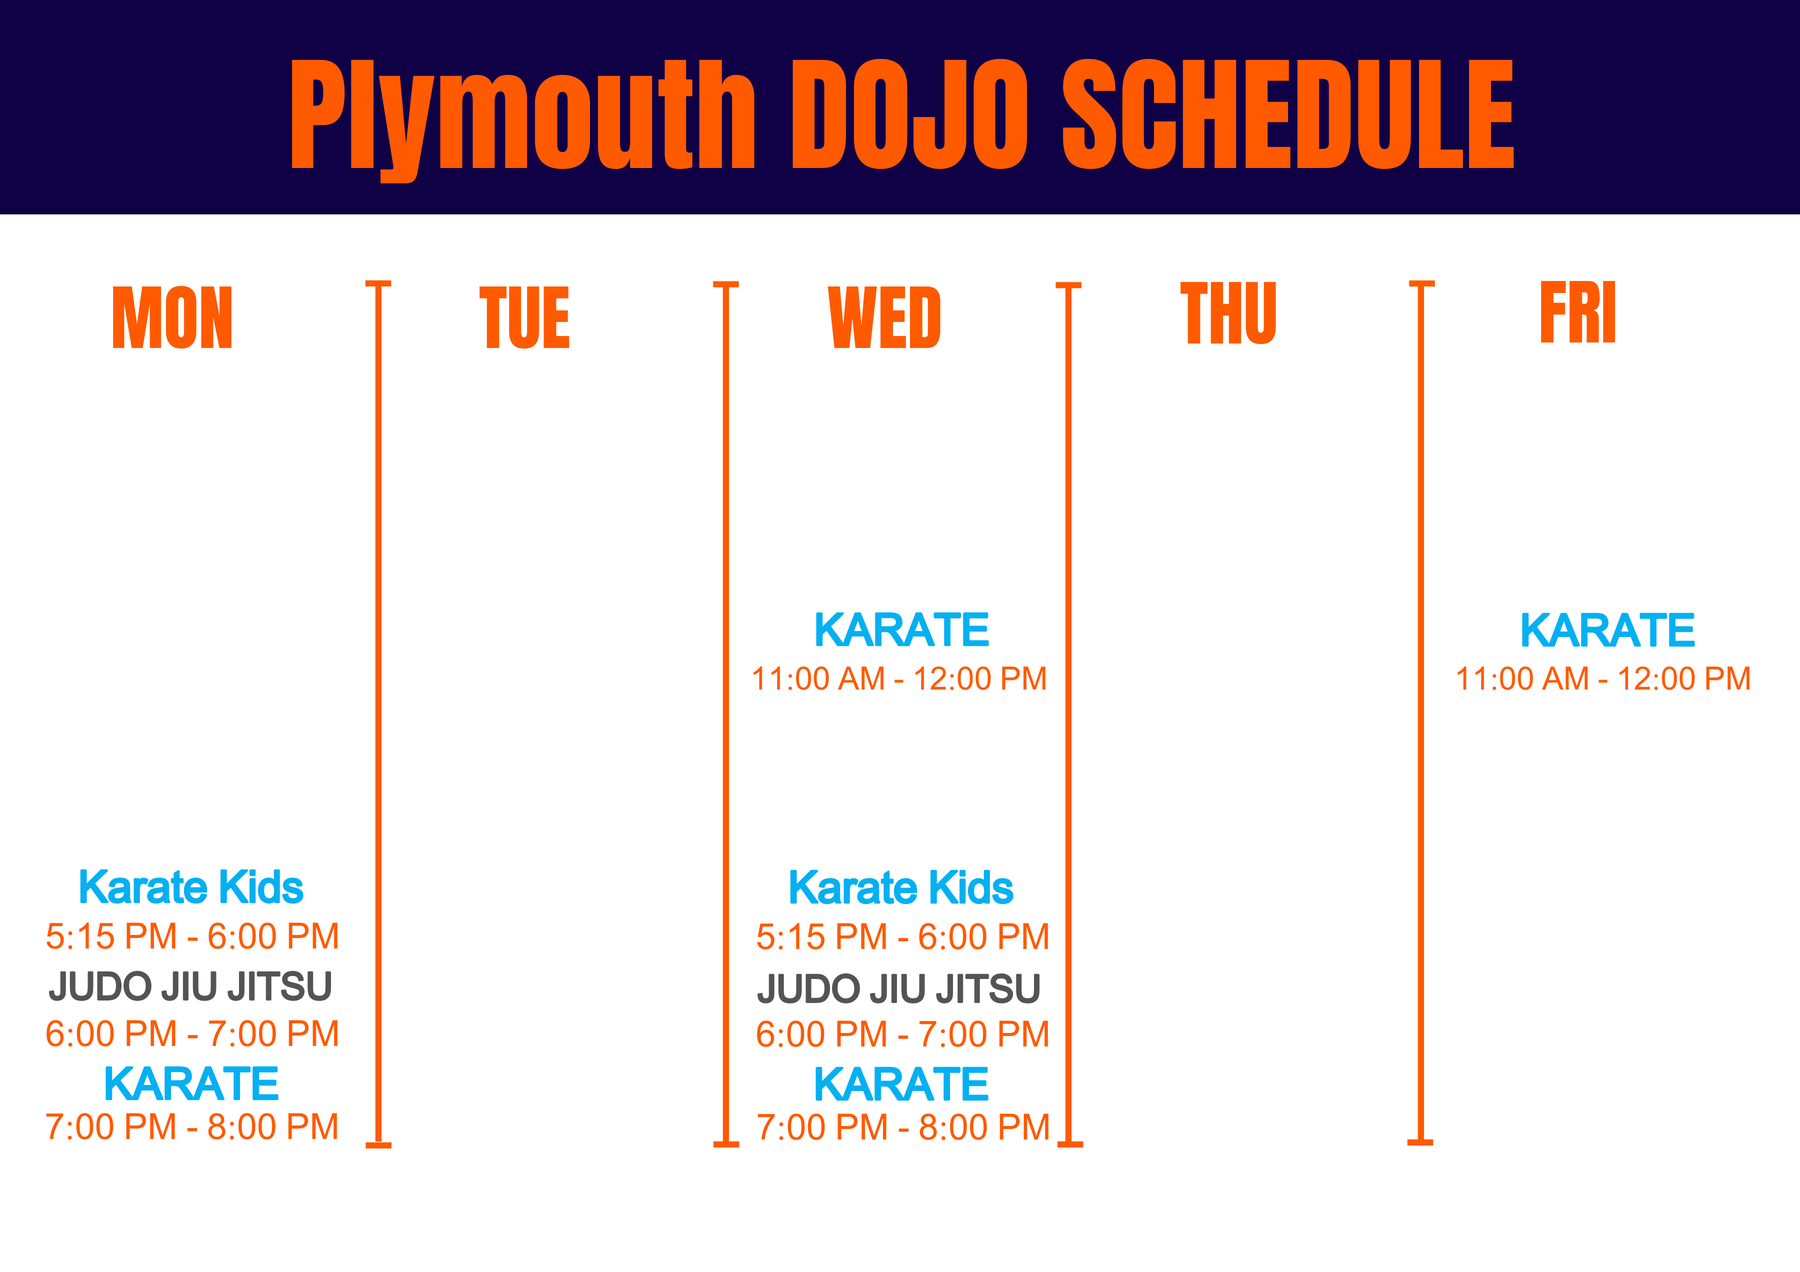 karate plymouth schedule